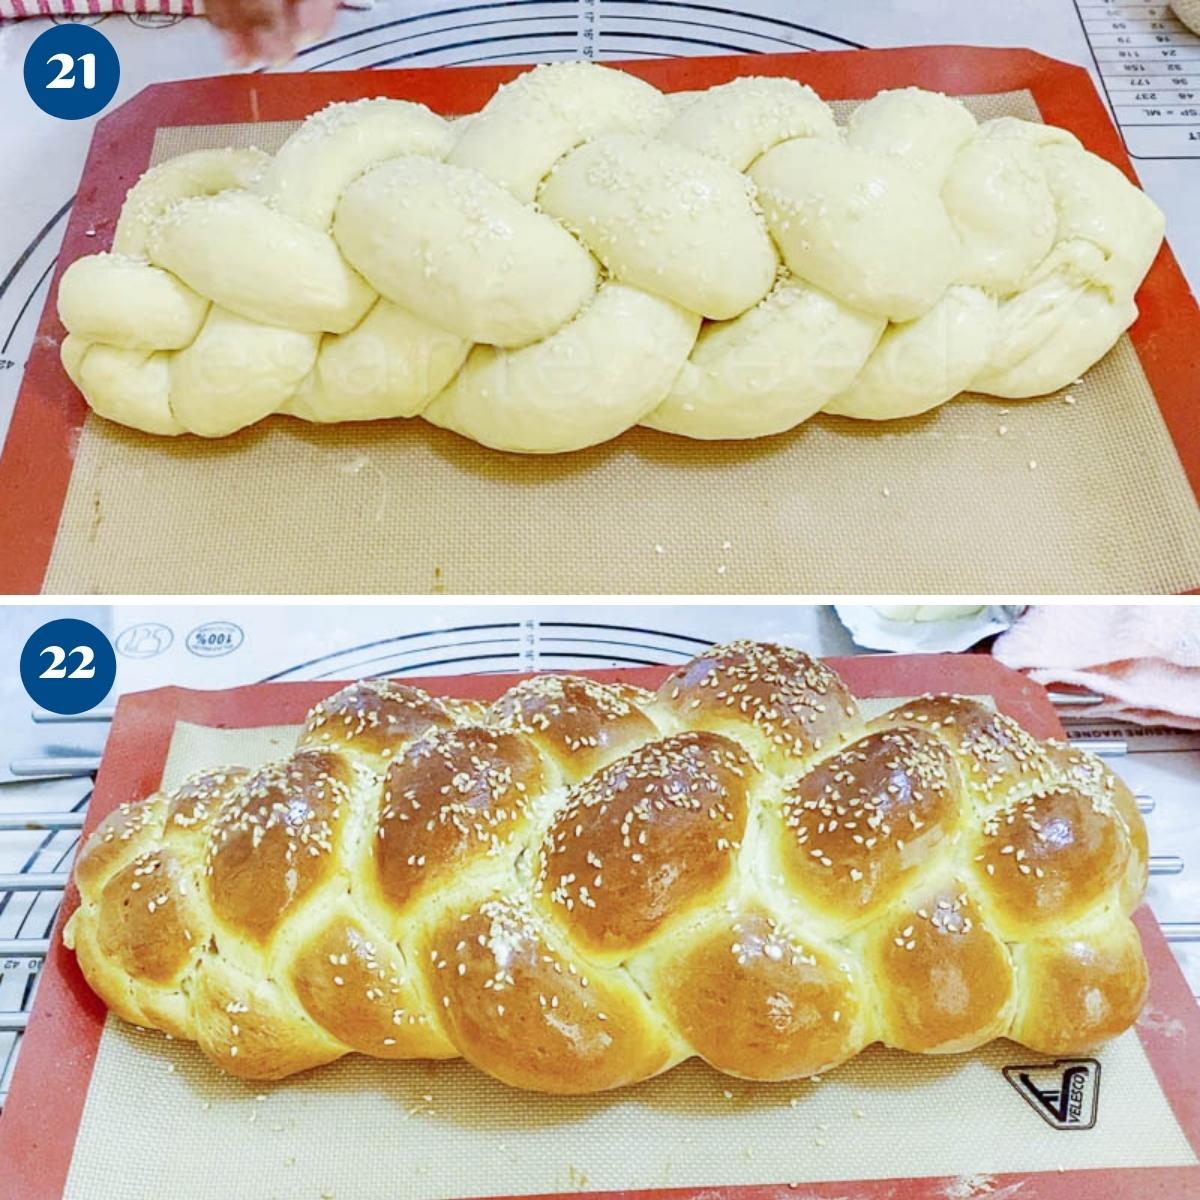 Progress pictures collage for baking challah.